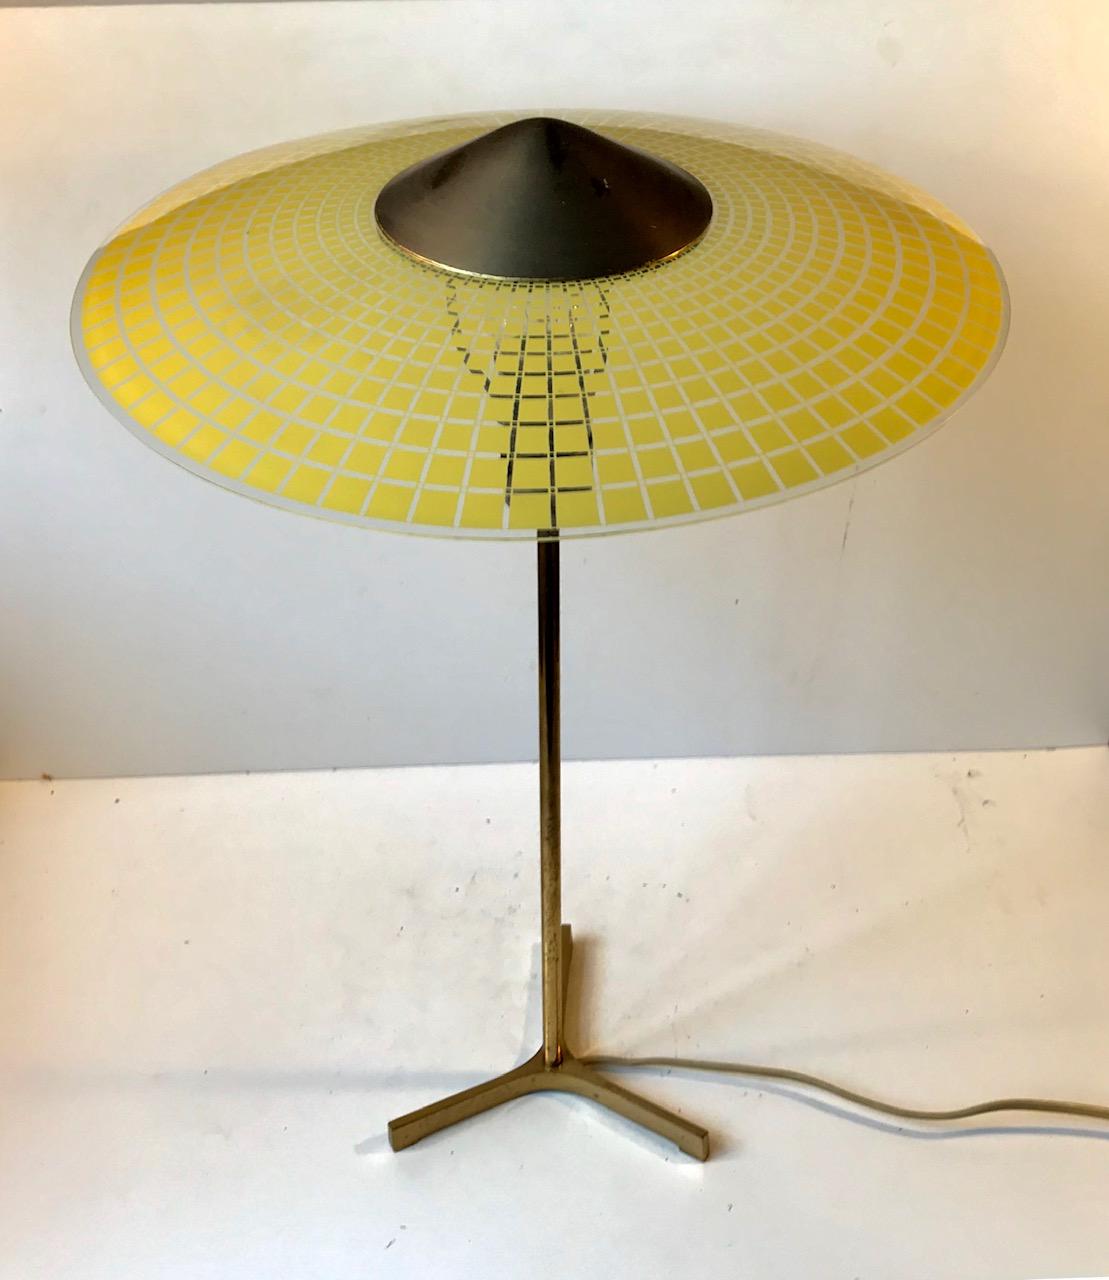 A lean and 'delicate' table or desk light composed of a Tristan brass base and checkered yellow glass shade set in a hooded brass top. It was designed anonymously in Switzerland during the late 1950s-early 1960s in a style reminiscent of Stilnovo.